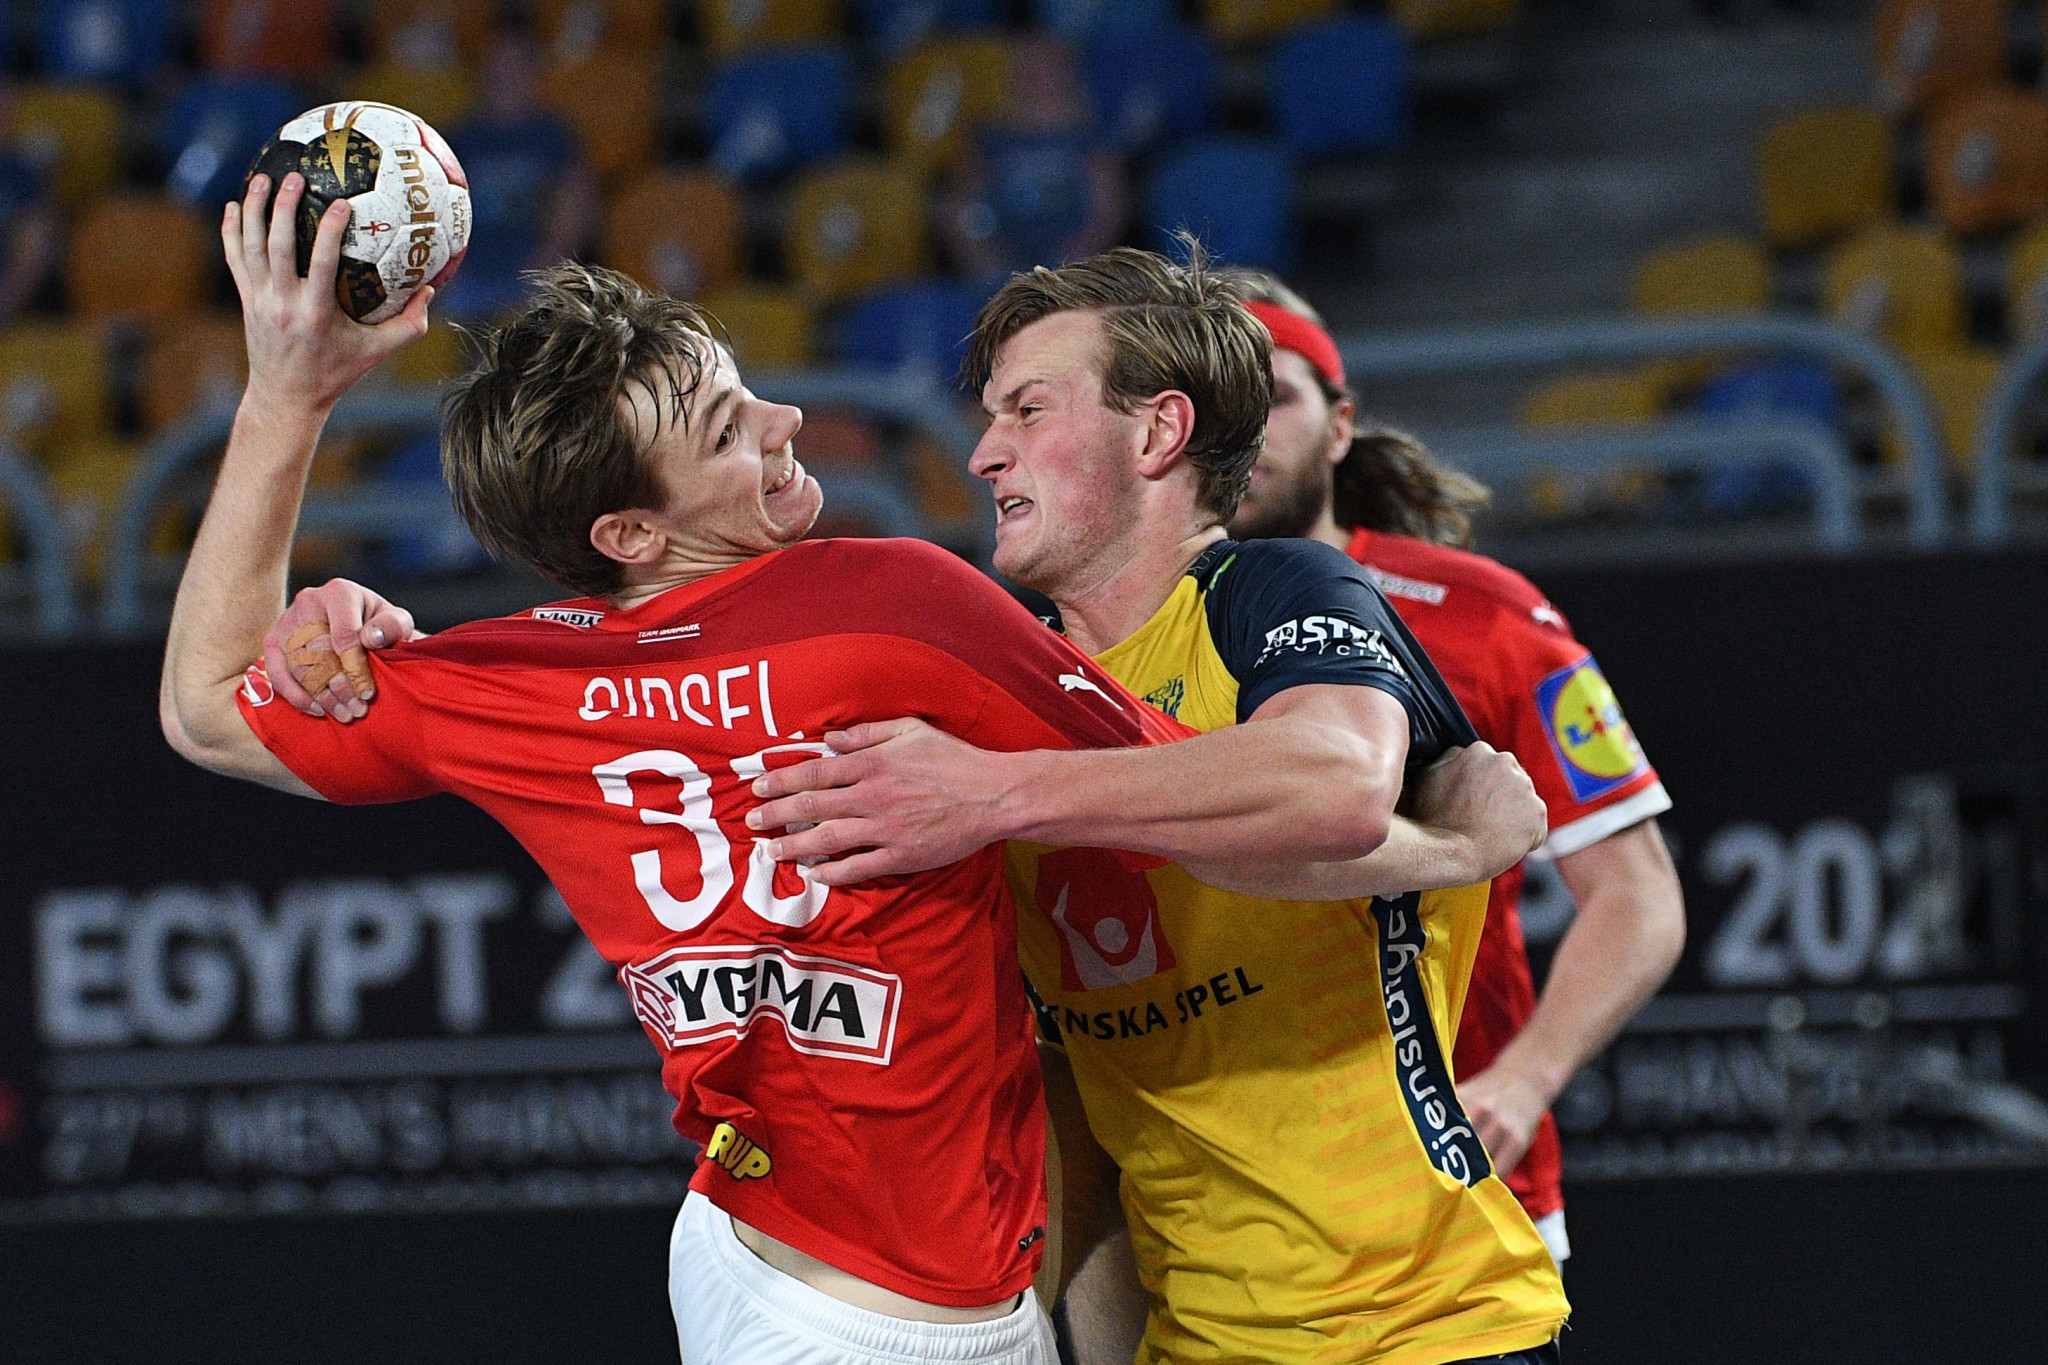 Bach claims Egypt has given Olympic Movement "confidence" after successful IHF World Championship